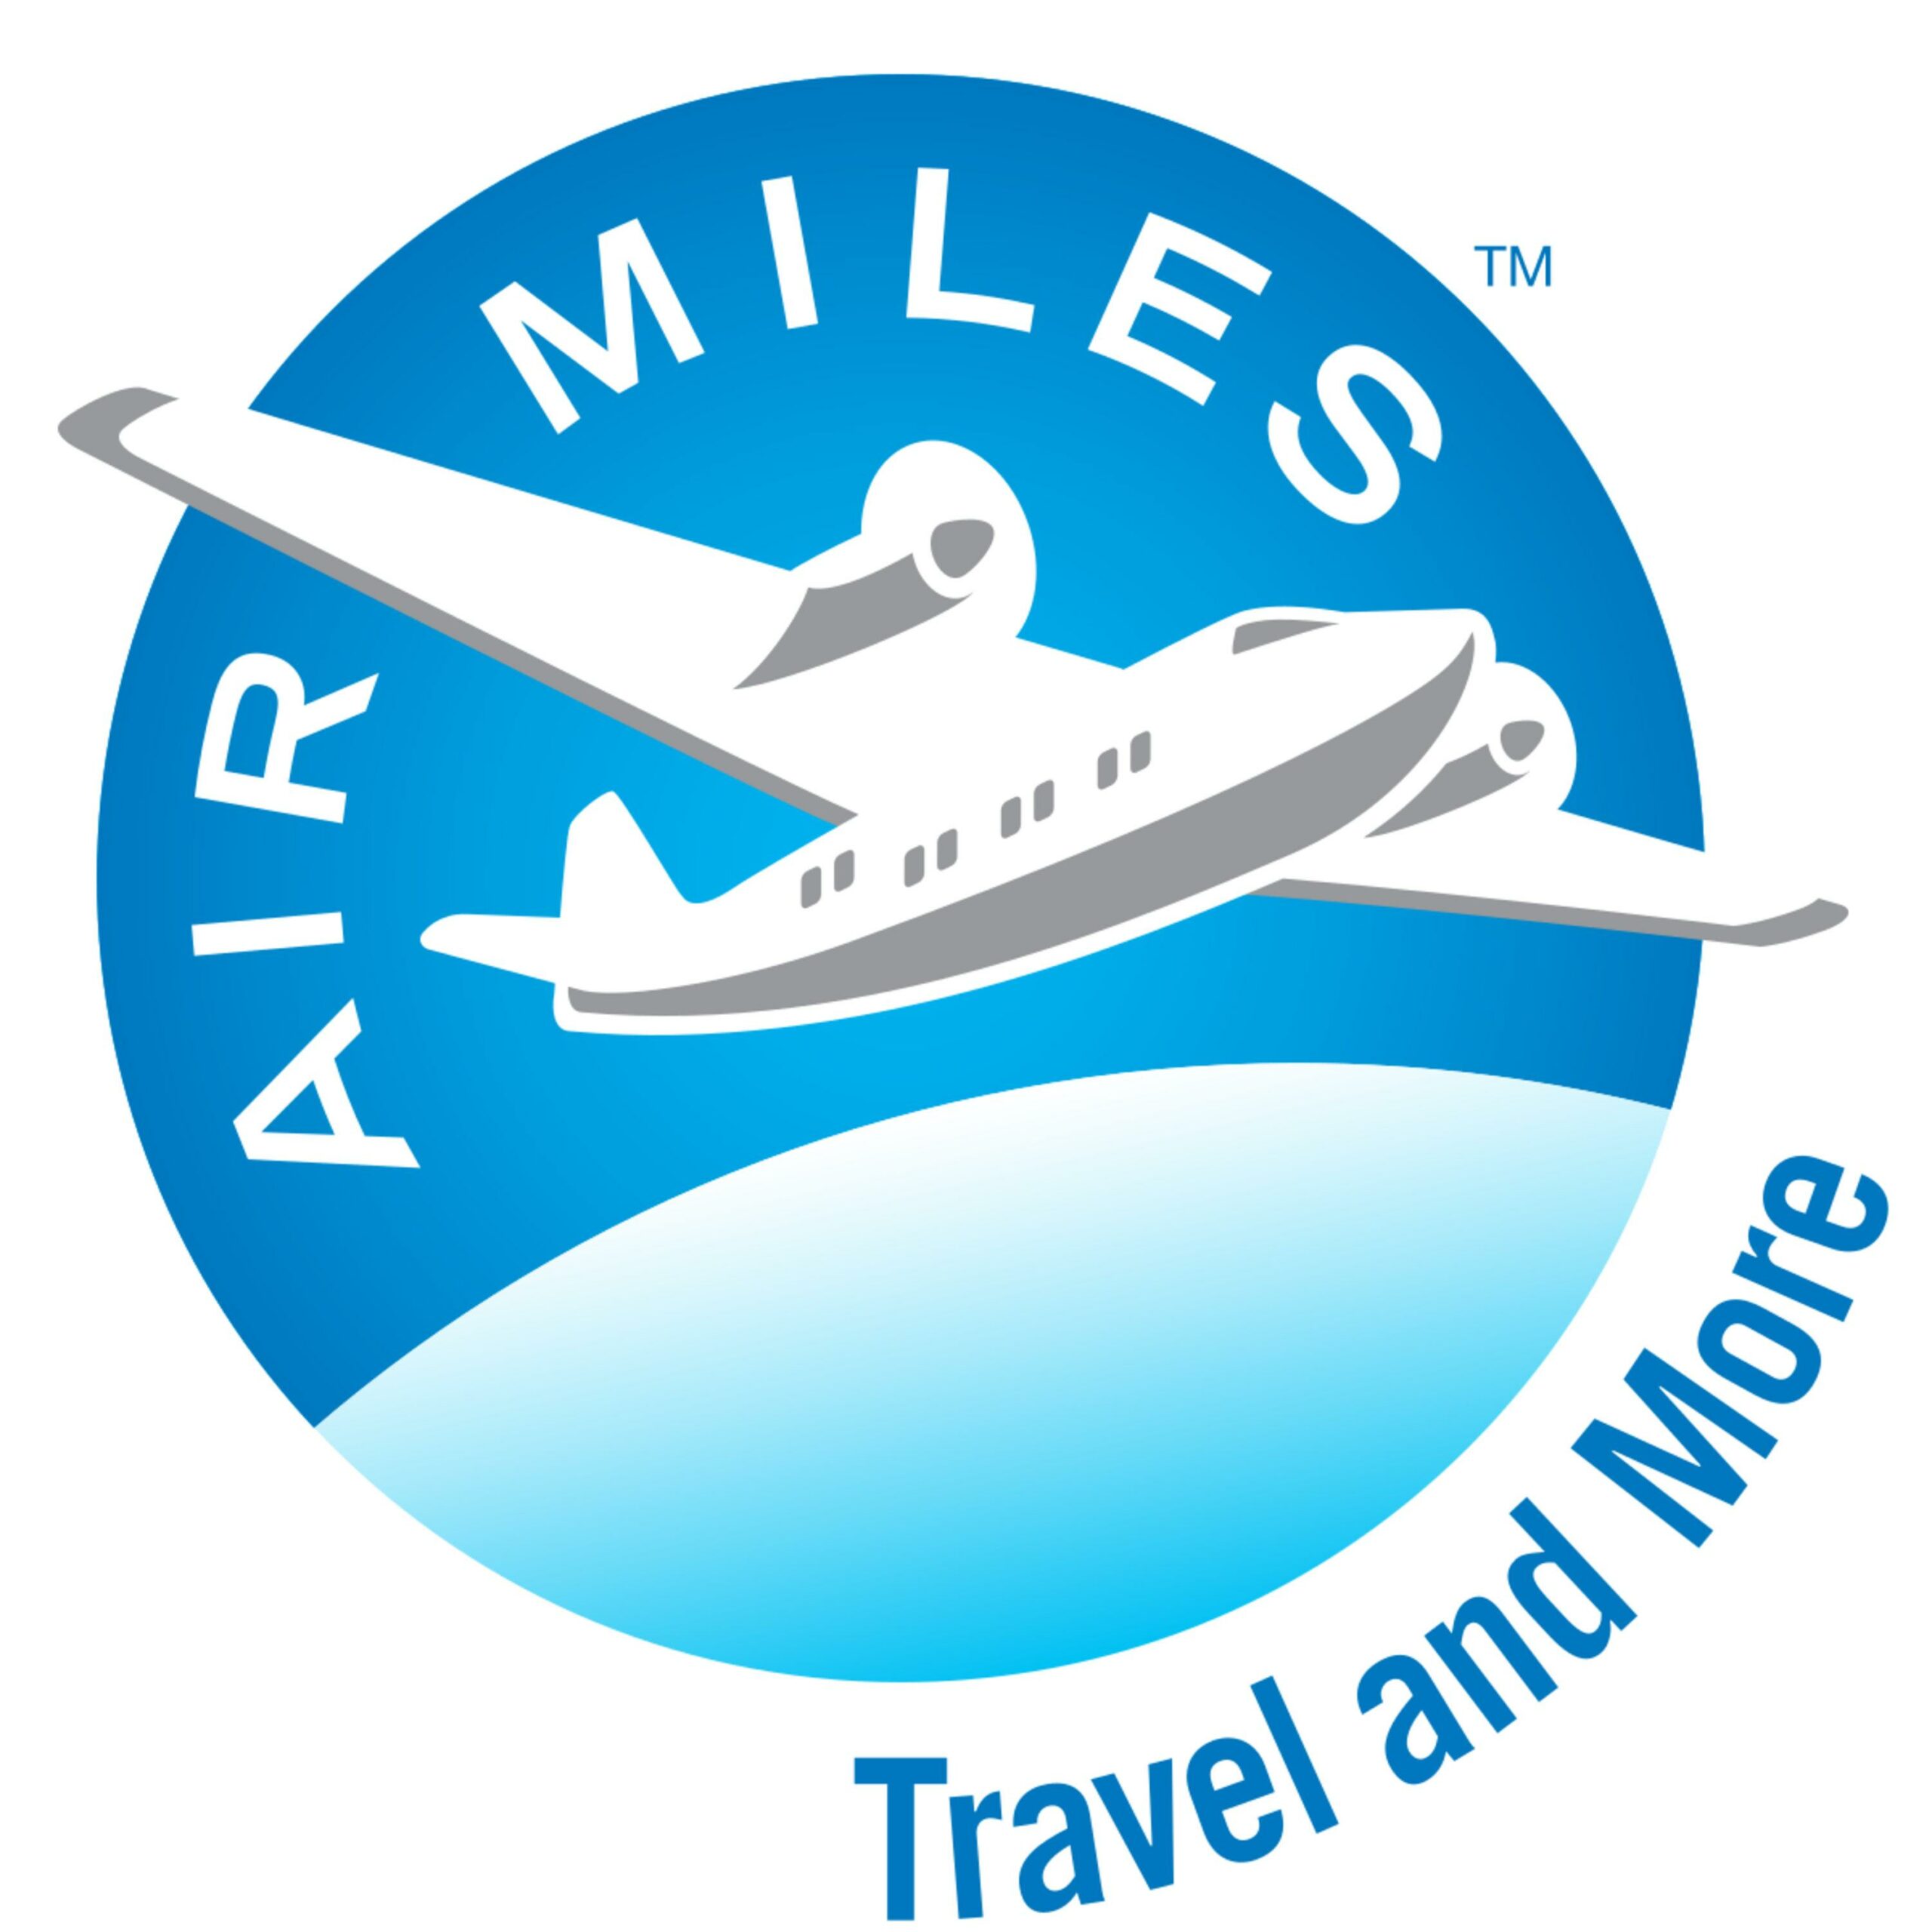 AM800 CKLW: MONEY MATTERS: BMO to buy AIR MILES